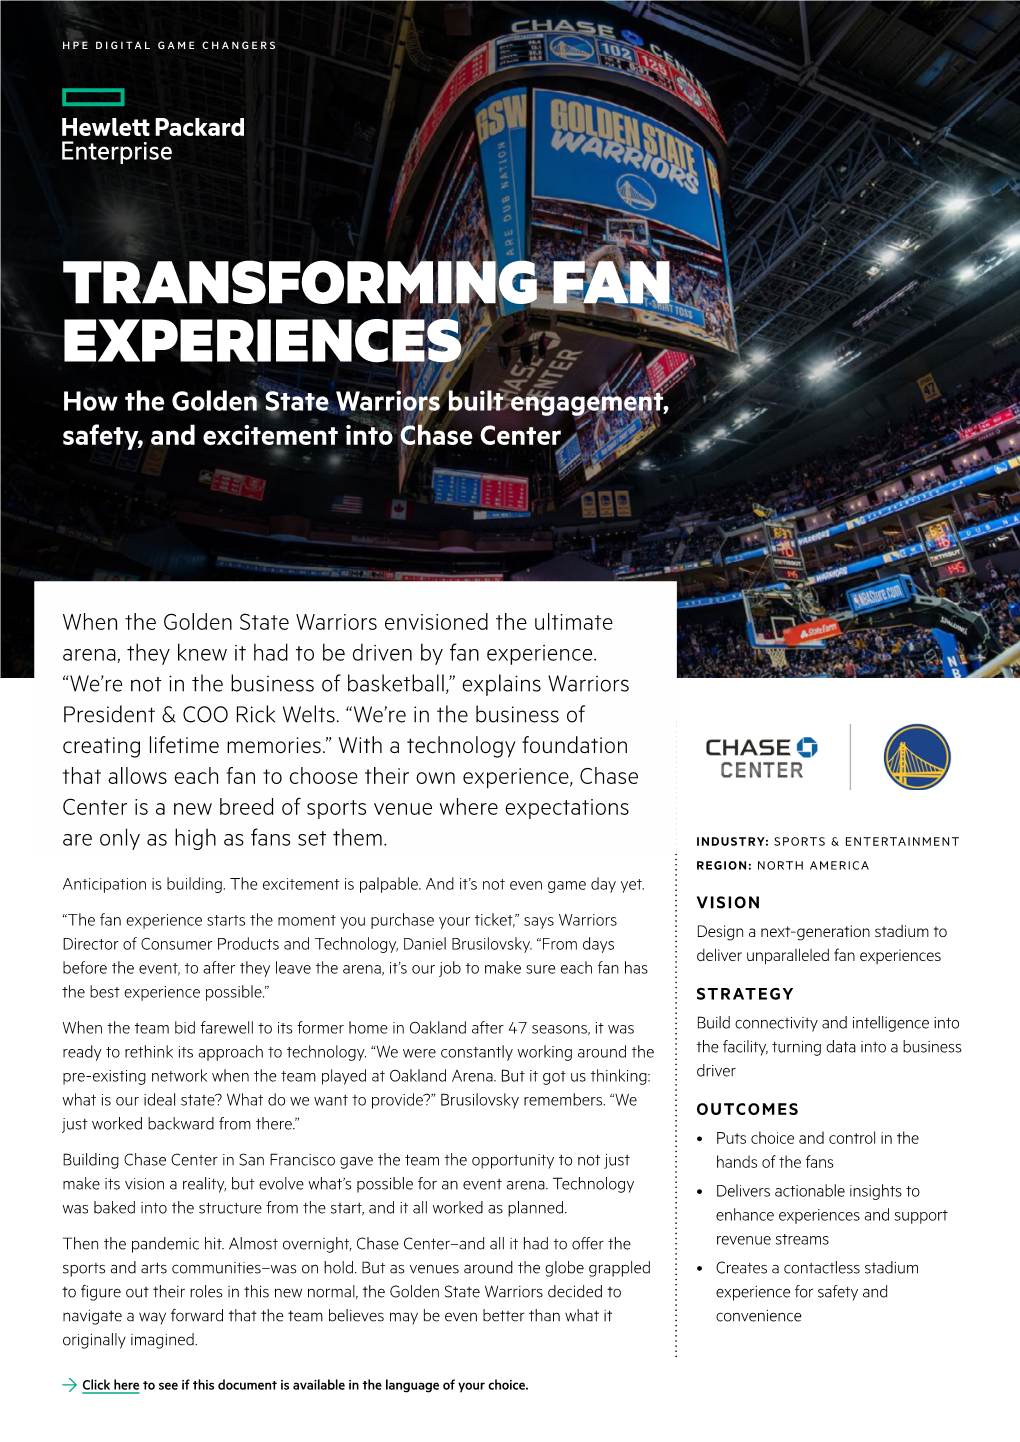 Golden State Warriors Built Engagement, Safety, and Excitement Into Chase Center